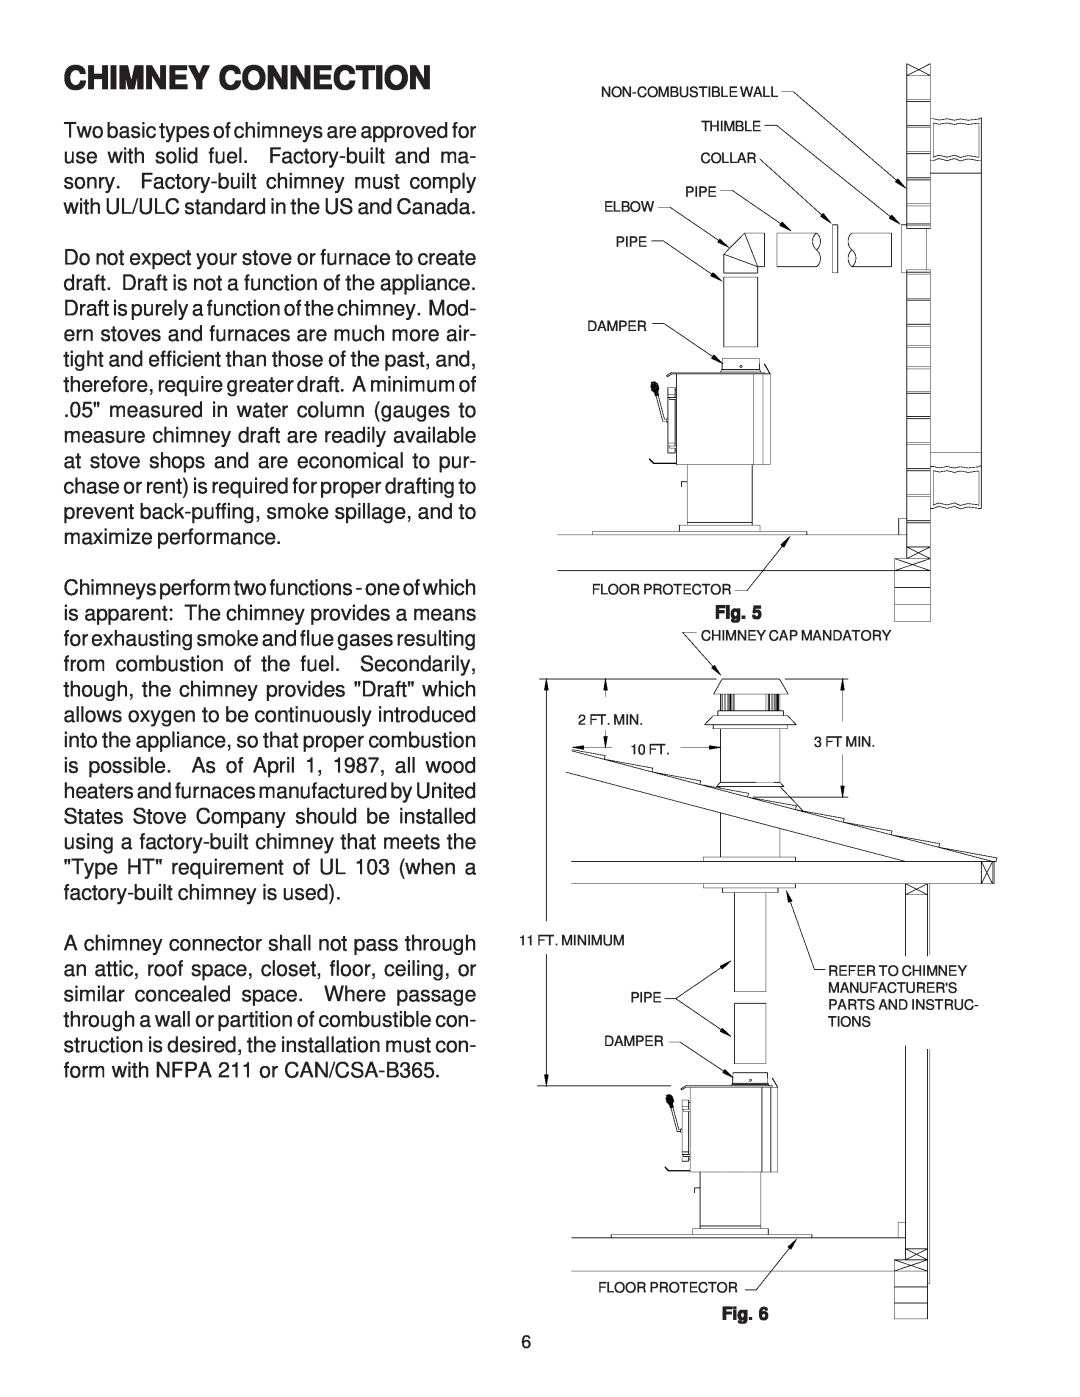 United States Stove 2007 owner manual Chimney Connection 